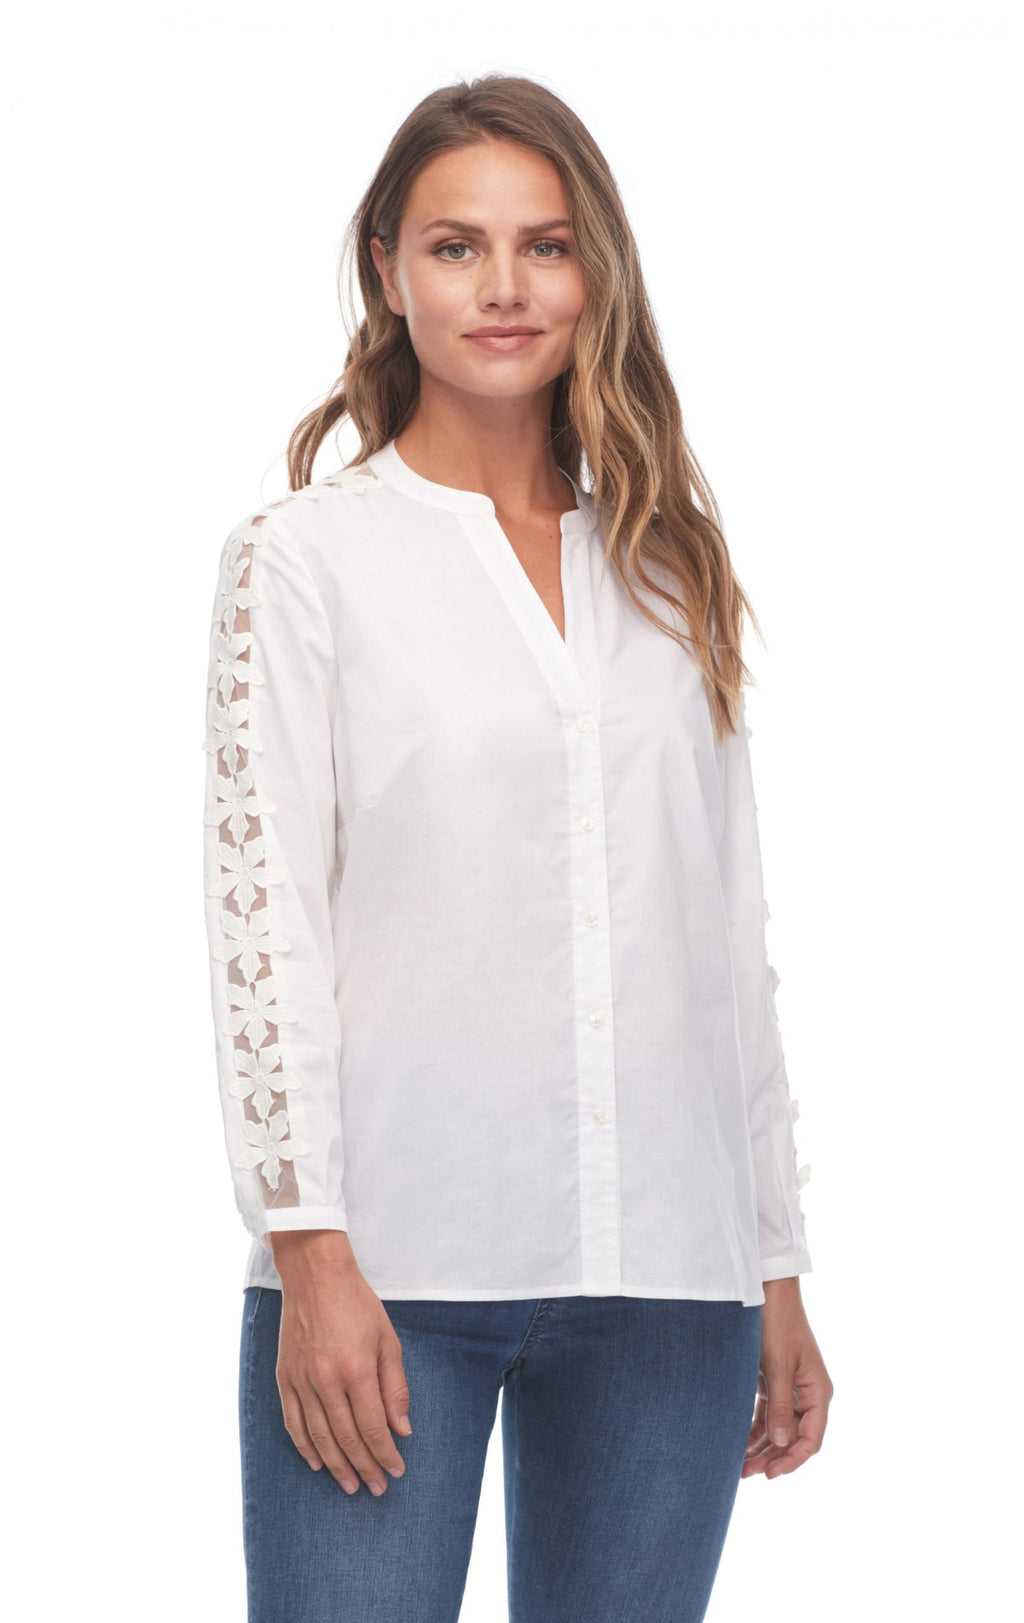 3-D DAISY SLEEVE APPLIQUE BLOUSE - French Dressing